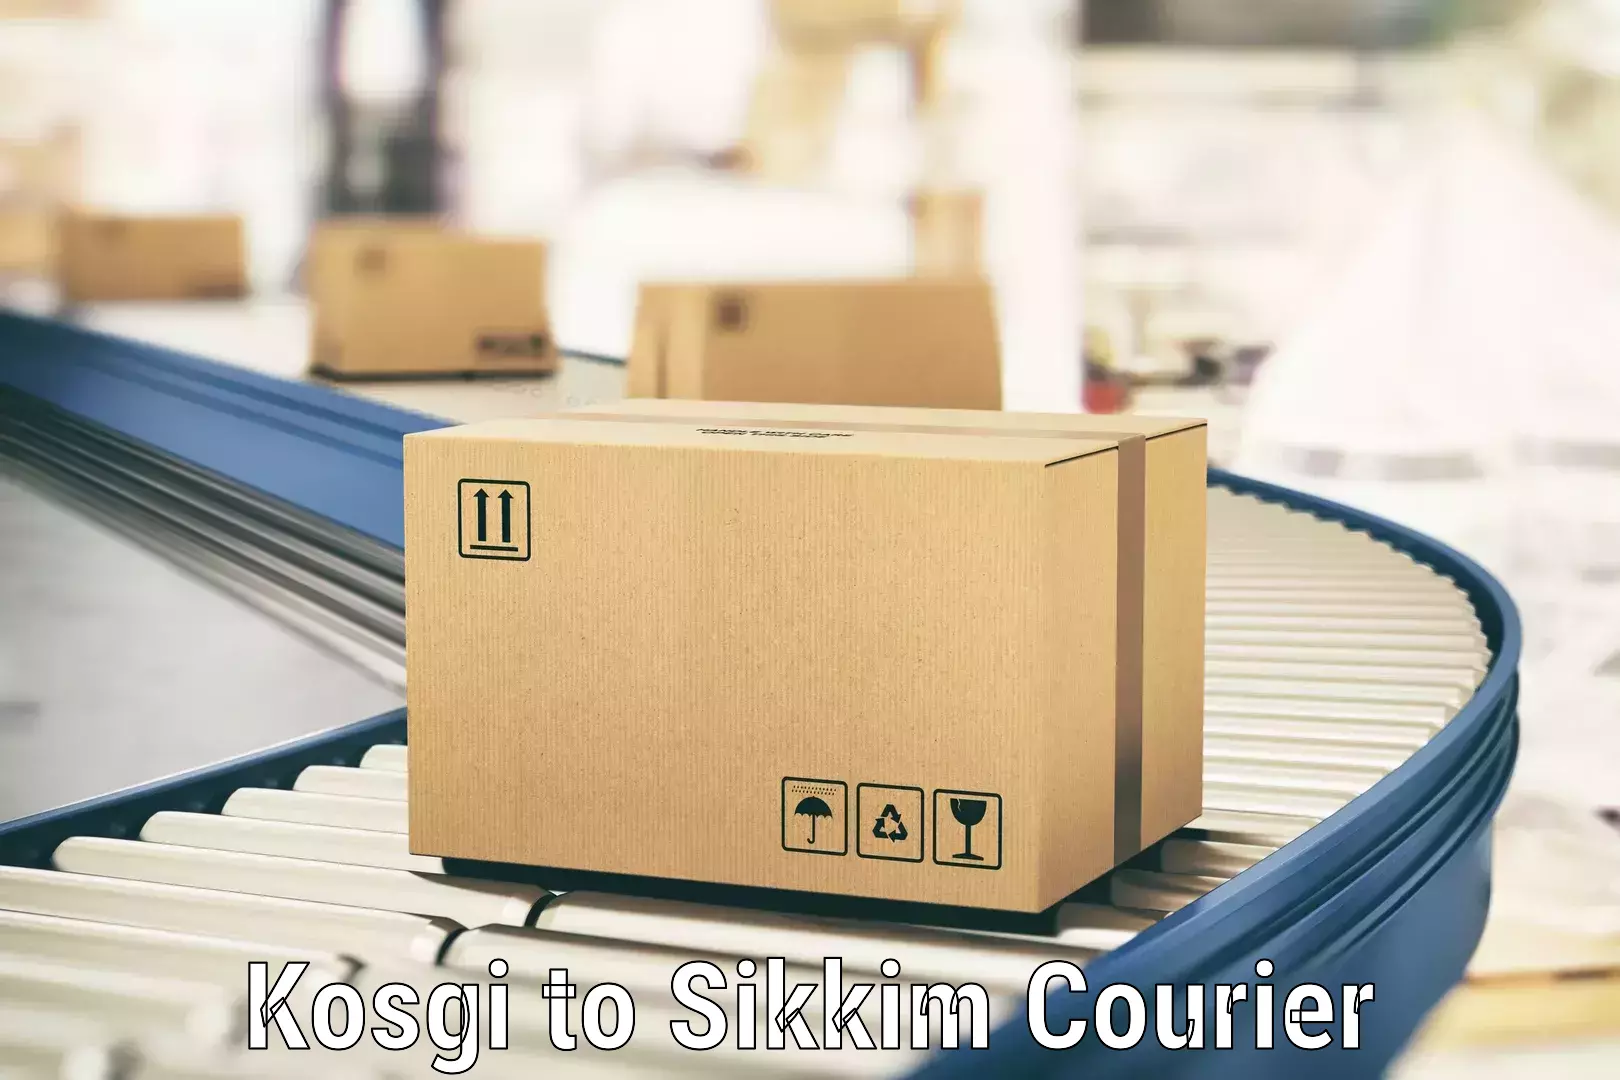 Subscription-based courier Kosgi to East Sikkim